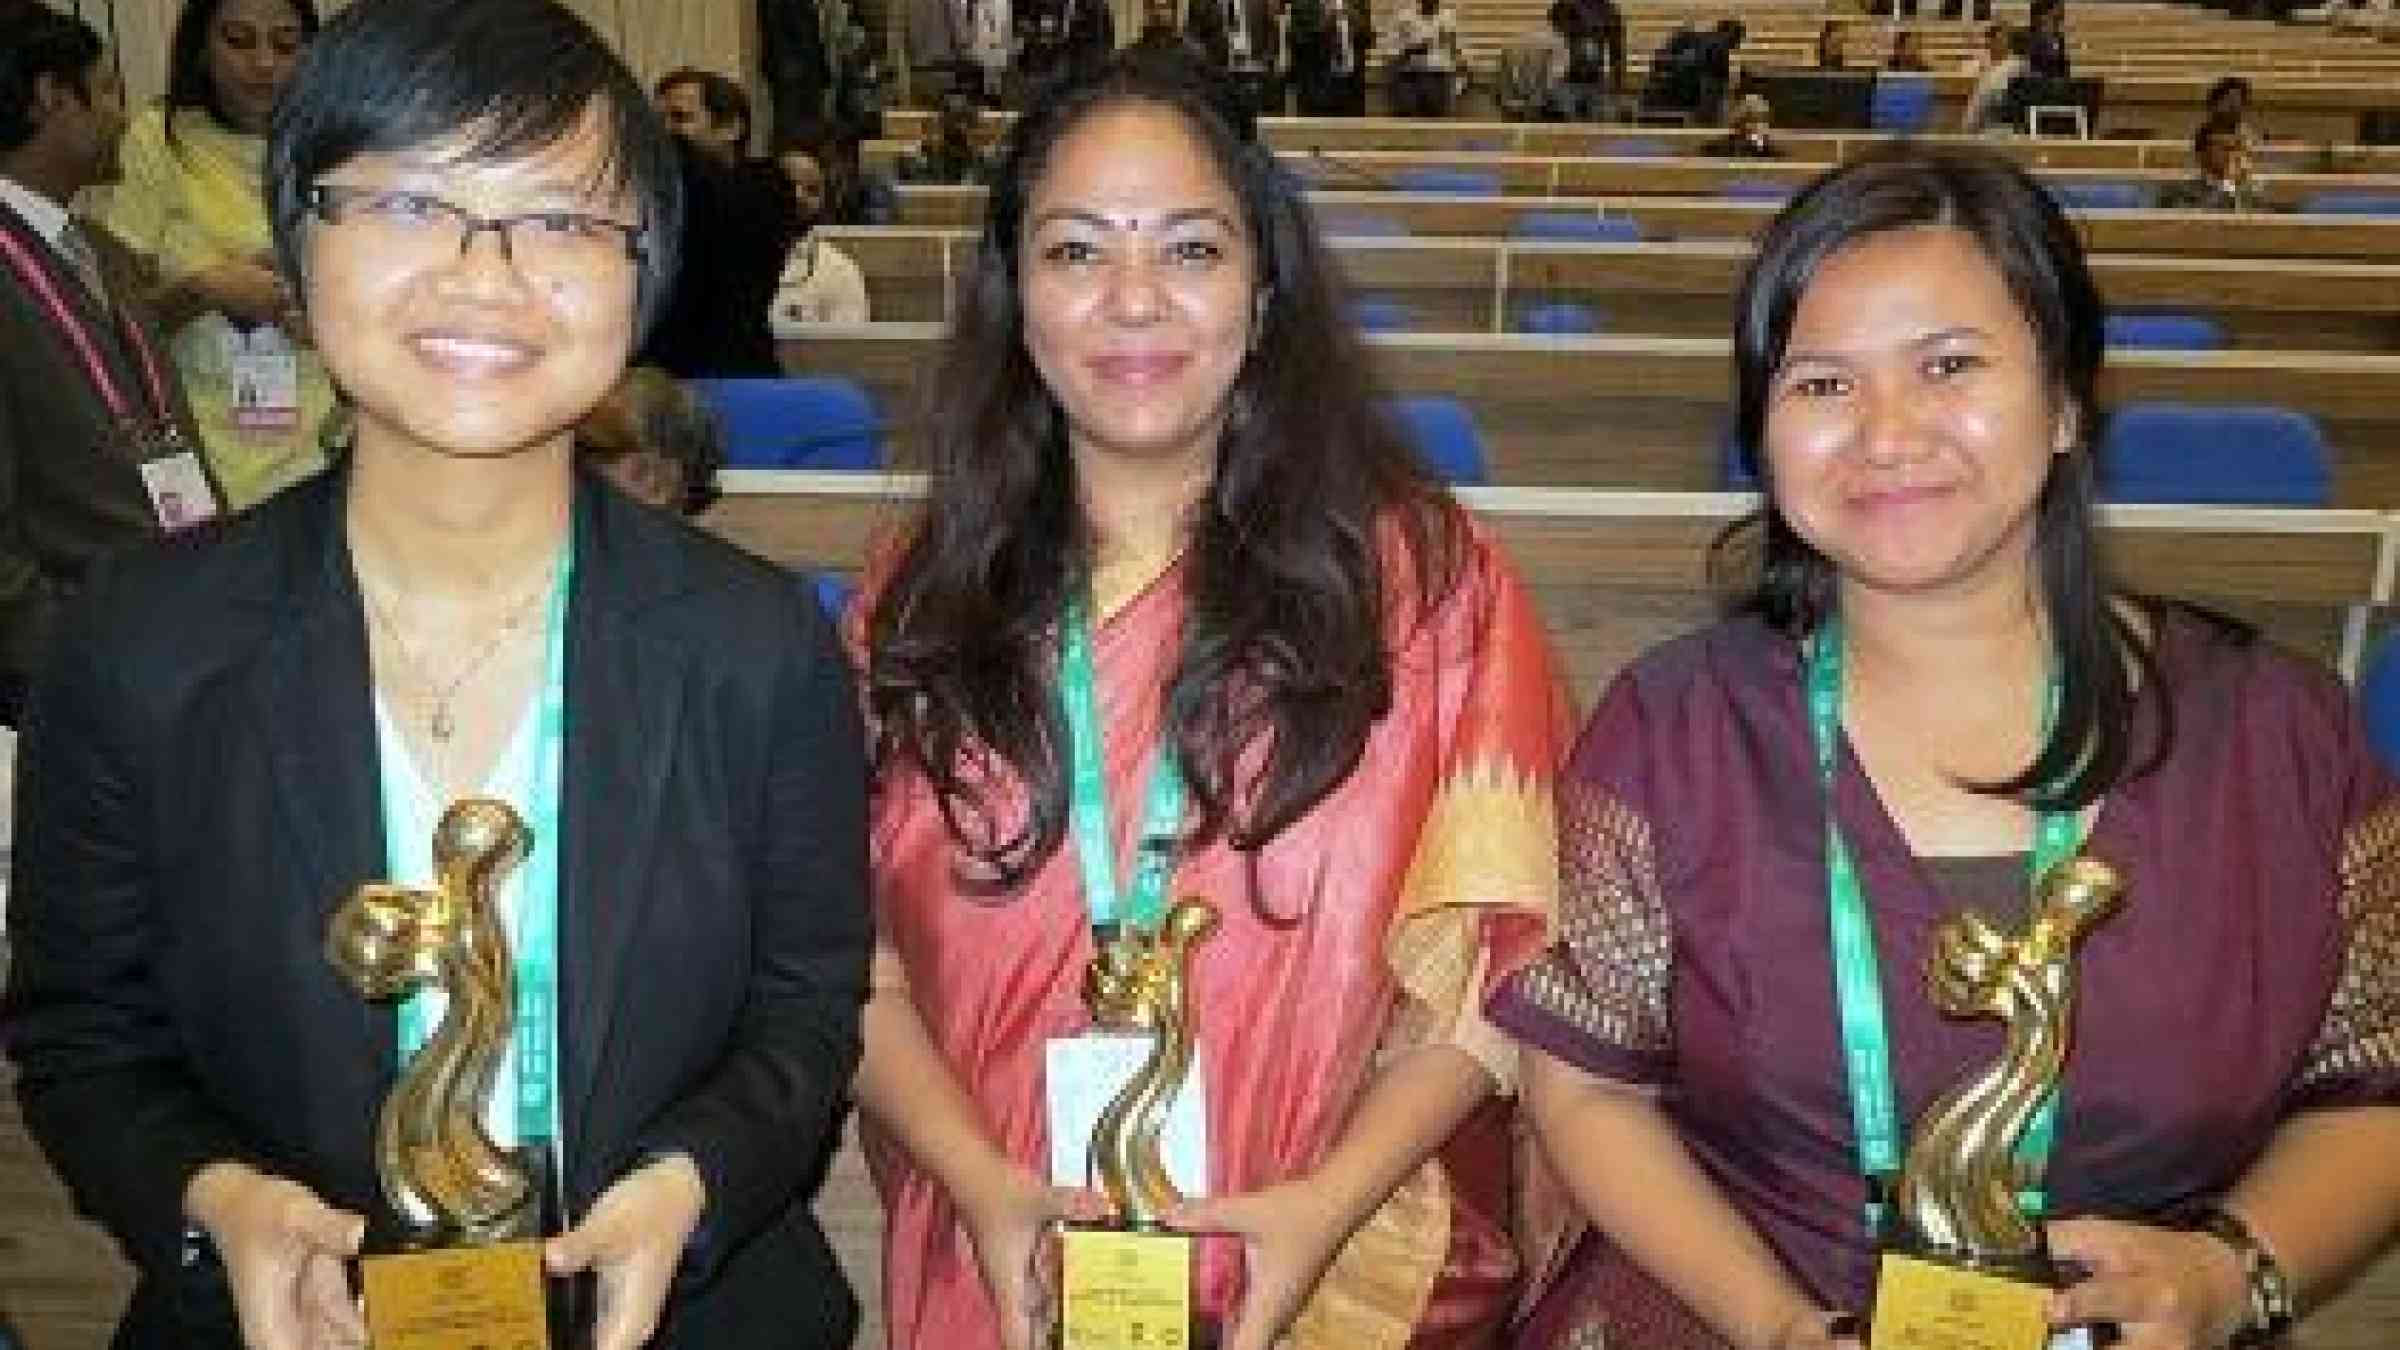 (From left) Ms.Dang Thuy Duong, Ms. Meghna Chawla and Ms. Kartika Juwita celebrate with their trophies after being declated the three winners in the DRR Short Film competition at the closing of the AMCDRR 20016 in New Delhi. (Photo: UNISDR)